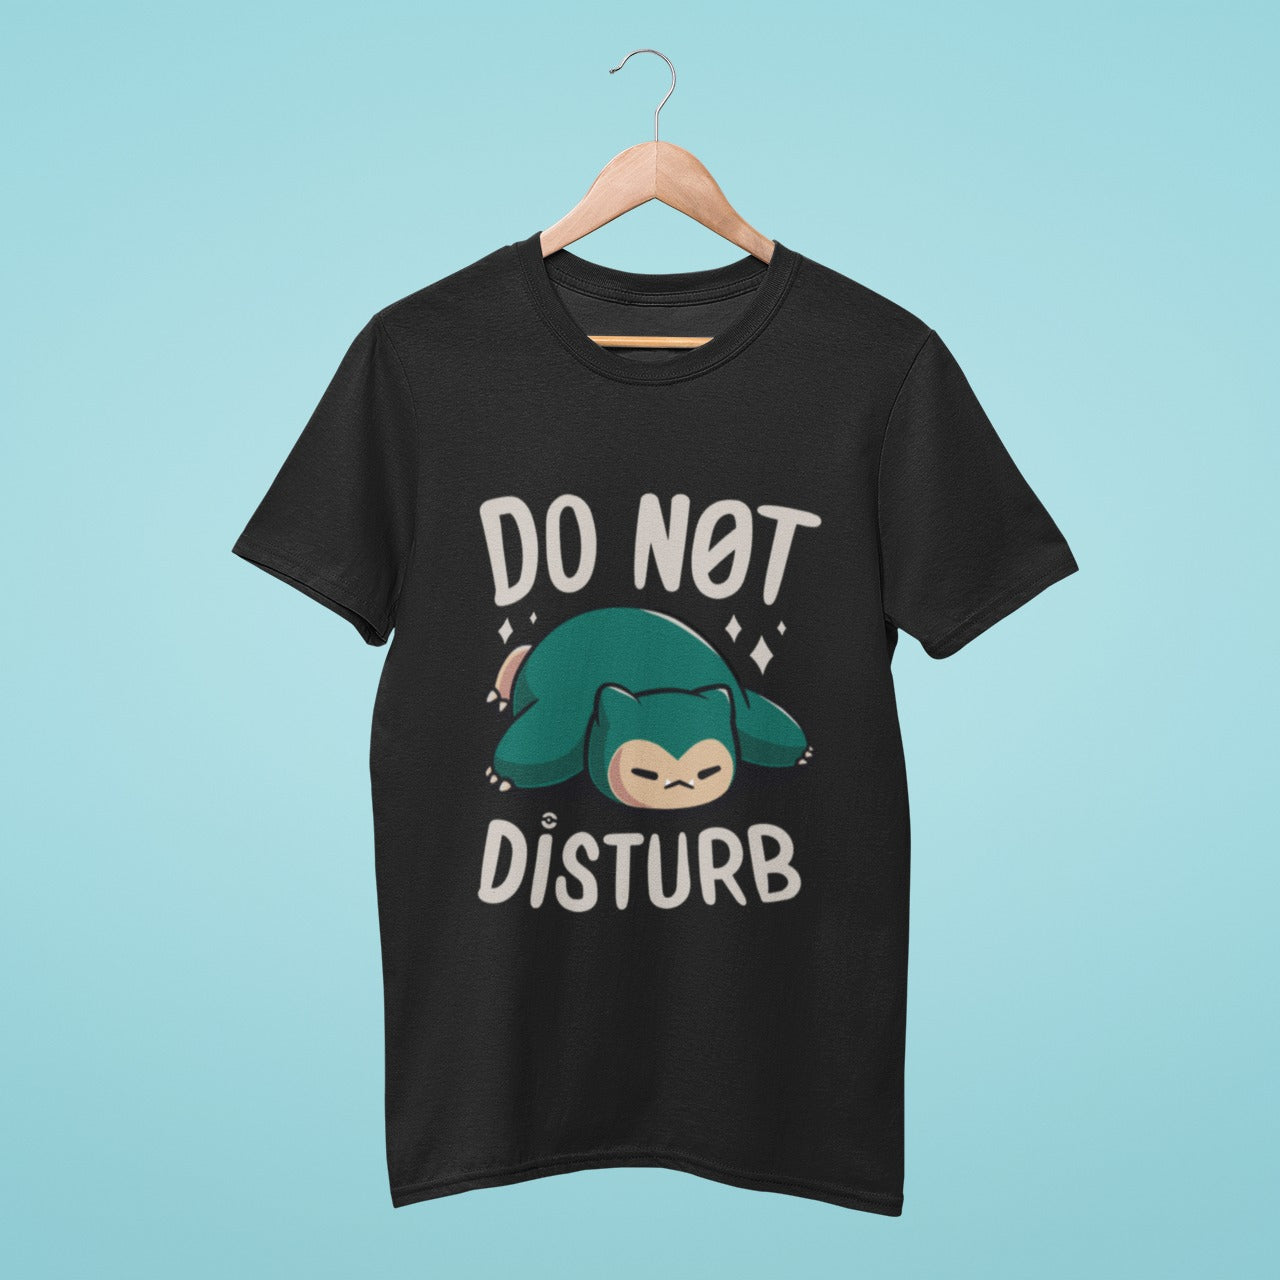 Get ready to show off your love for Snorlax with our black t-shirt featuring a sleeping Snorlax and the playful slogan "Do Not Disturb." Made with high-quality materials, this comfortable and durable t-shirt is perfect for any fan of the iconic Pokémon. Order now and add this fun and playful t-shirt to your casual wardrobe!